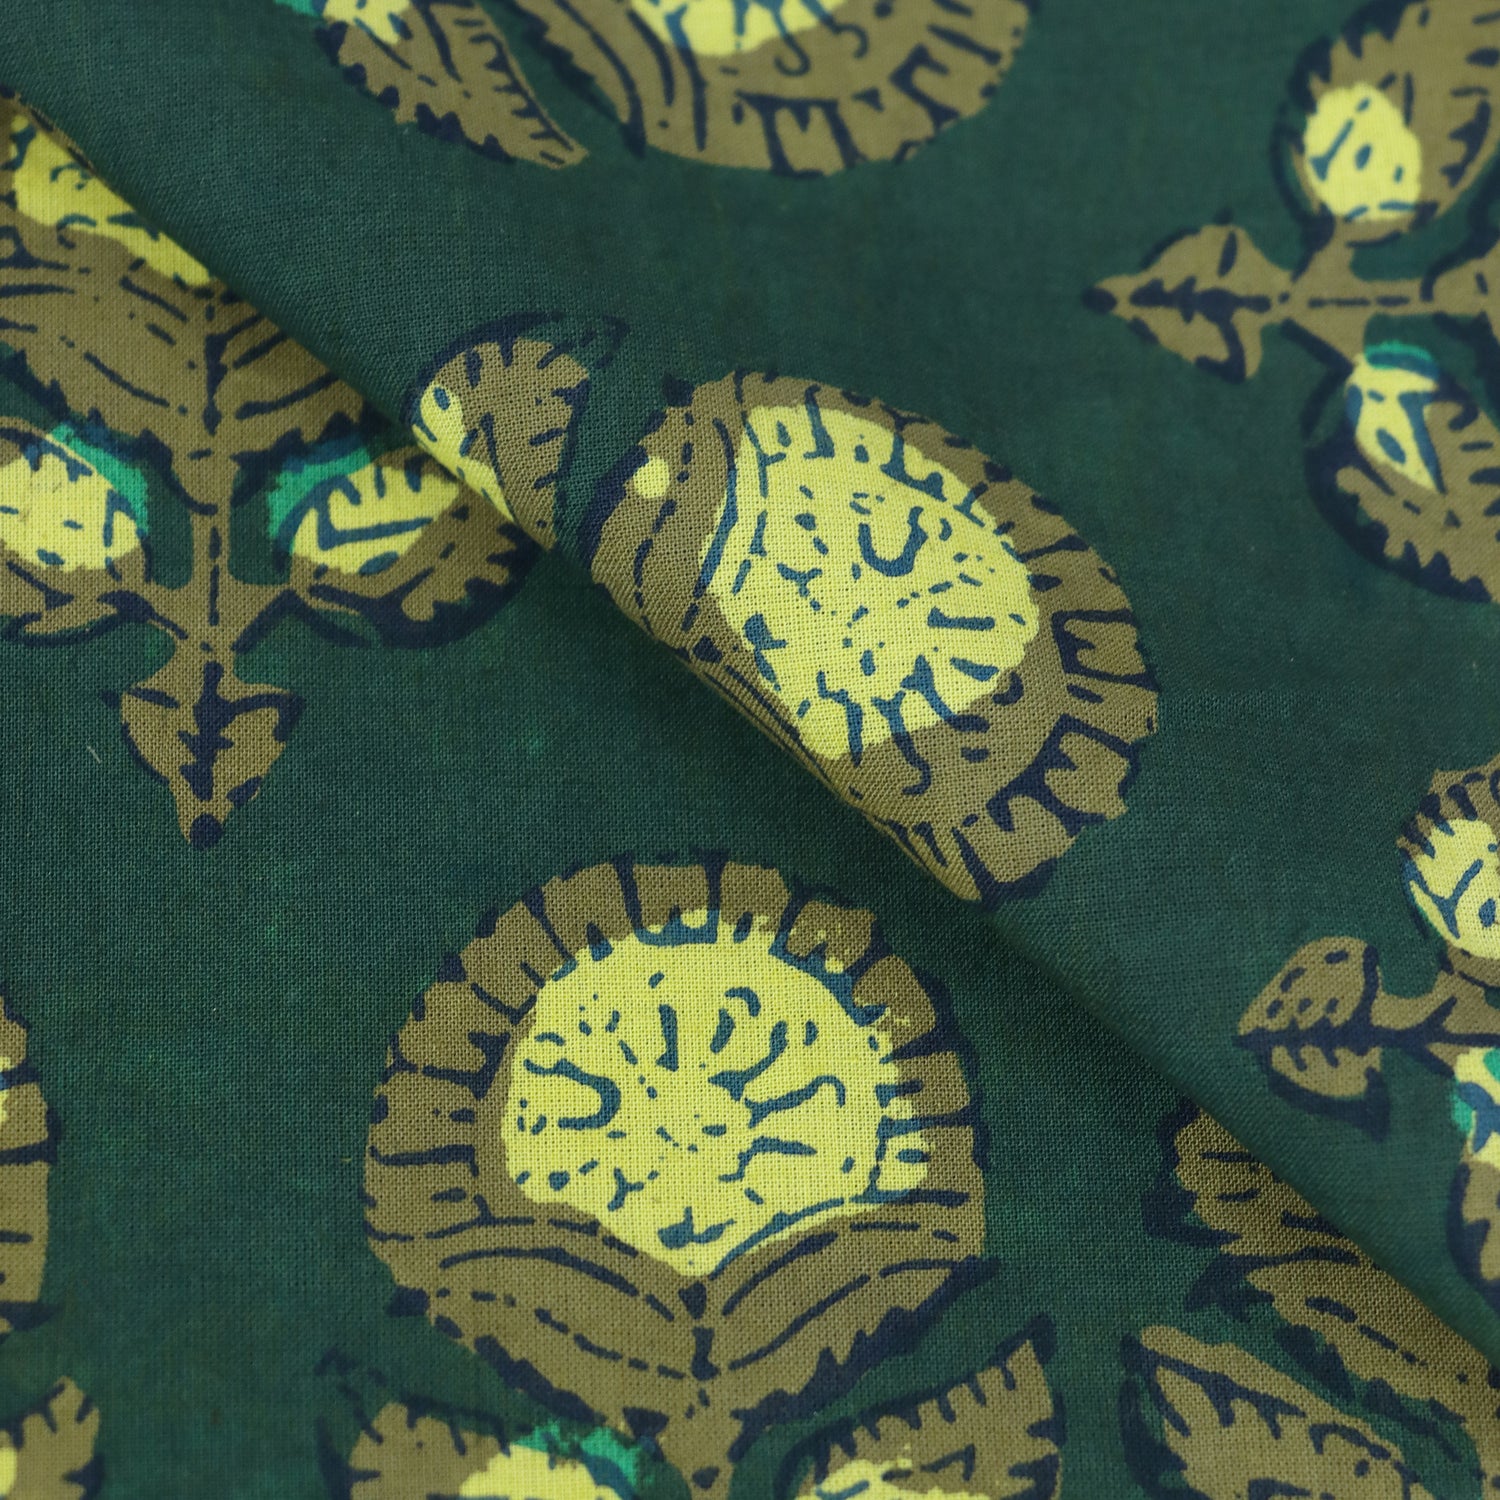 Green Floral Print Fabric 